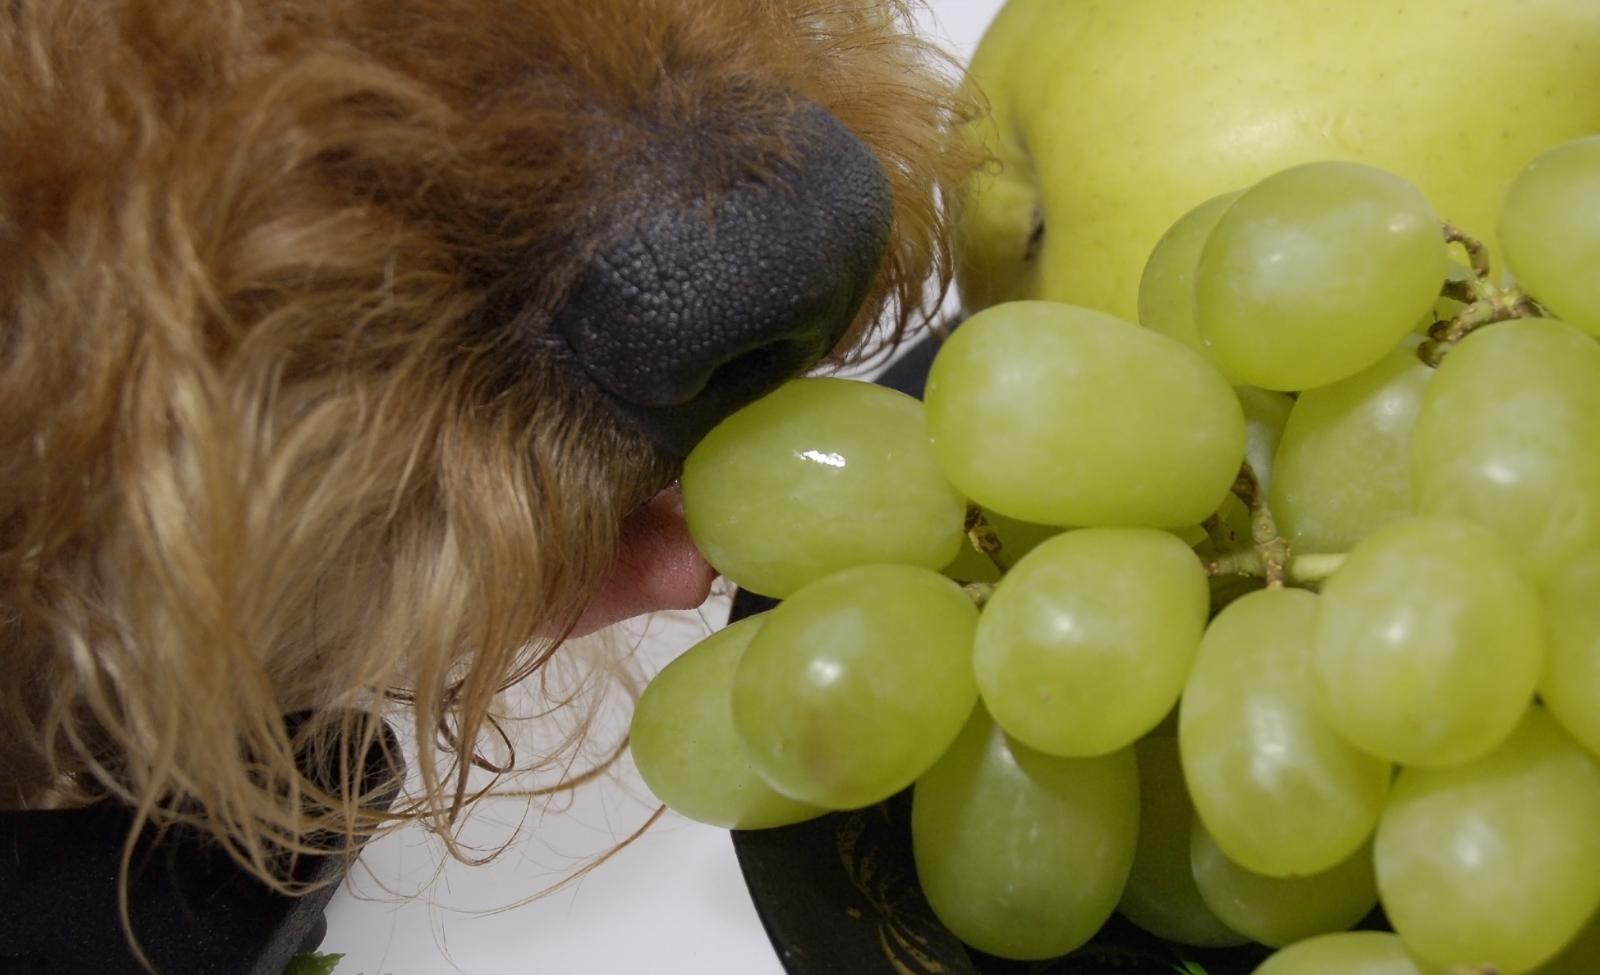 can-i-give-grapes-to-my-dog